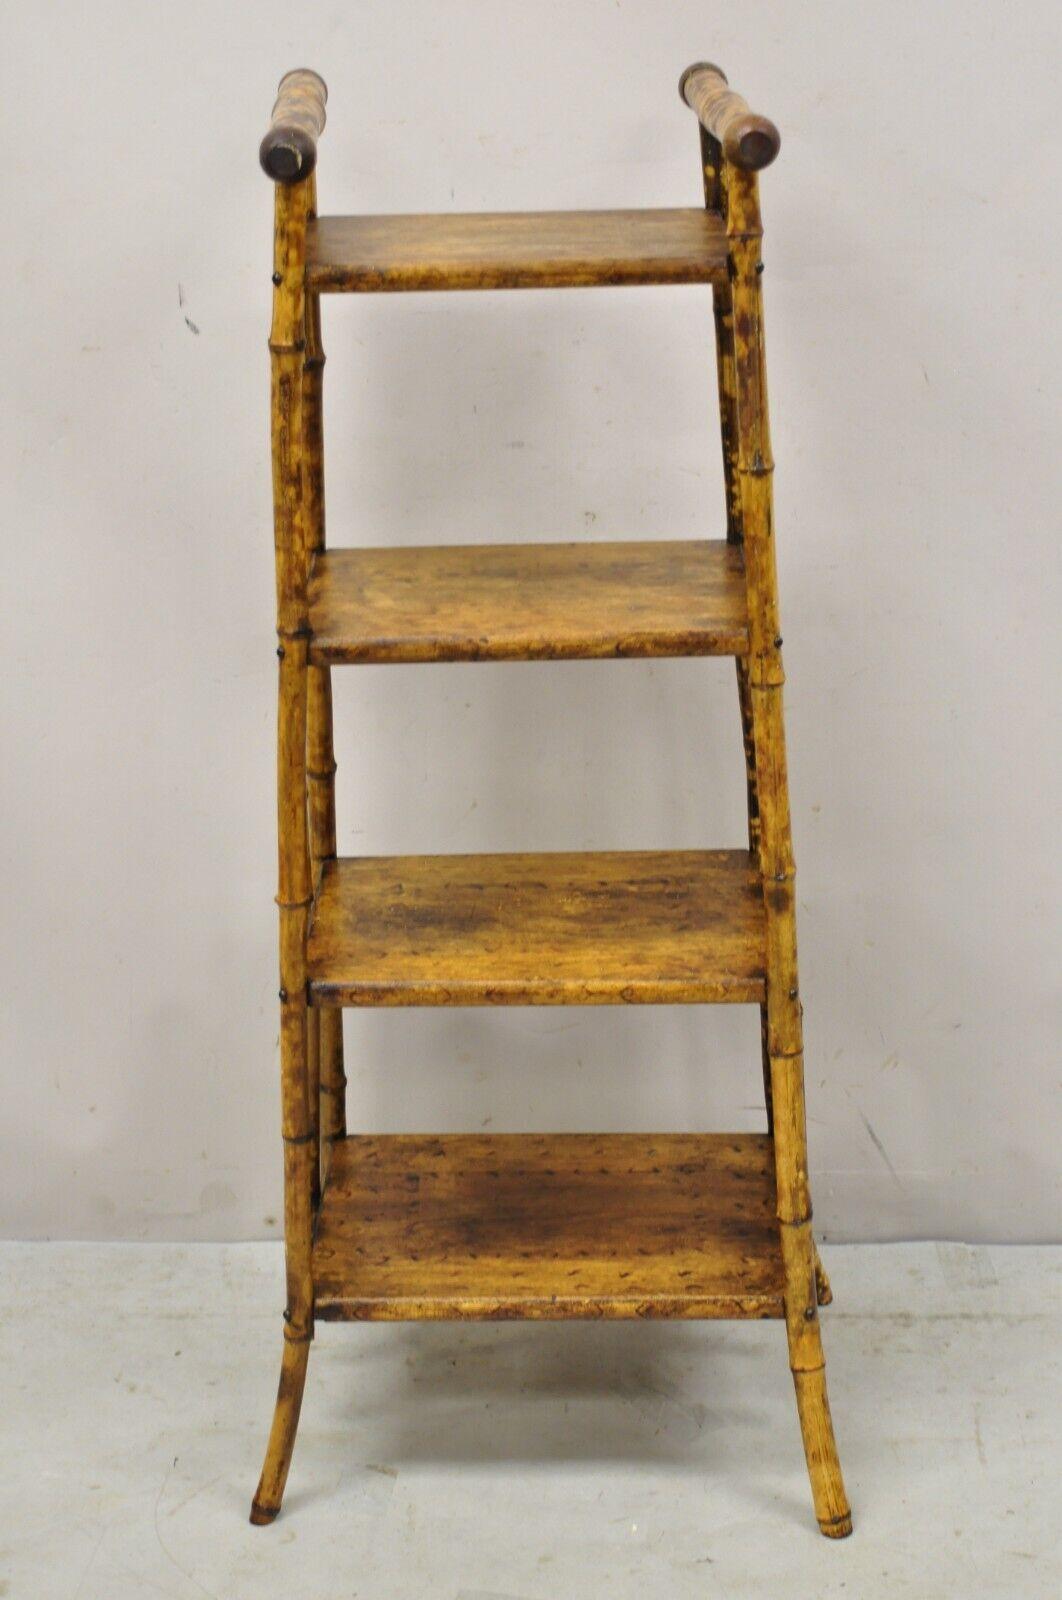 Antique English Victorian bamboo 4 tier angled curio etagere shelf. Item featured is bamboo construction, 4 tiers, shapely angled form, very nice antique item, quality English craftsmanship. circa 1900. Measurements: 44.5